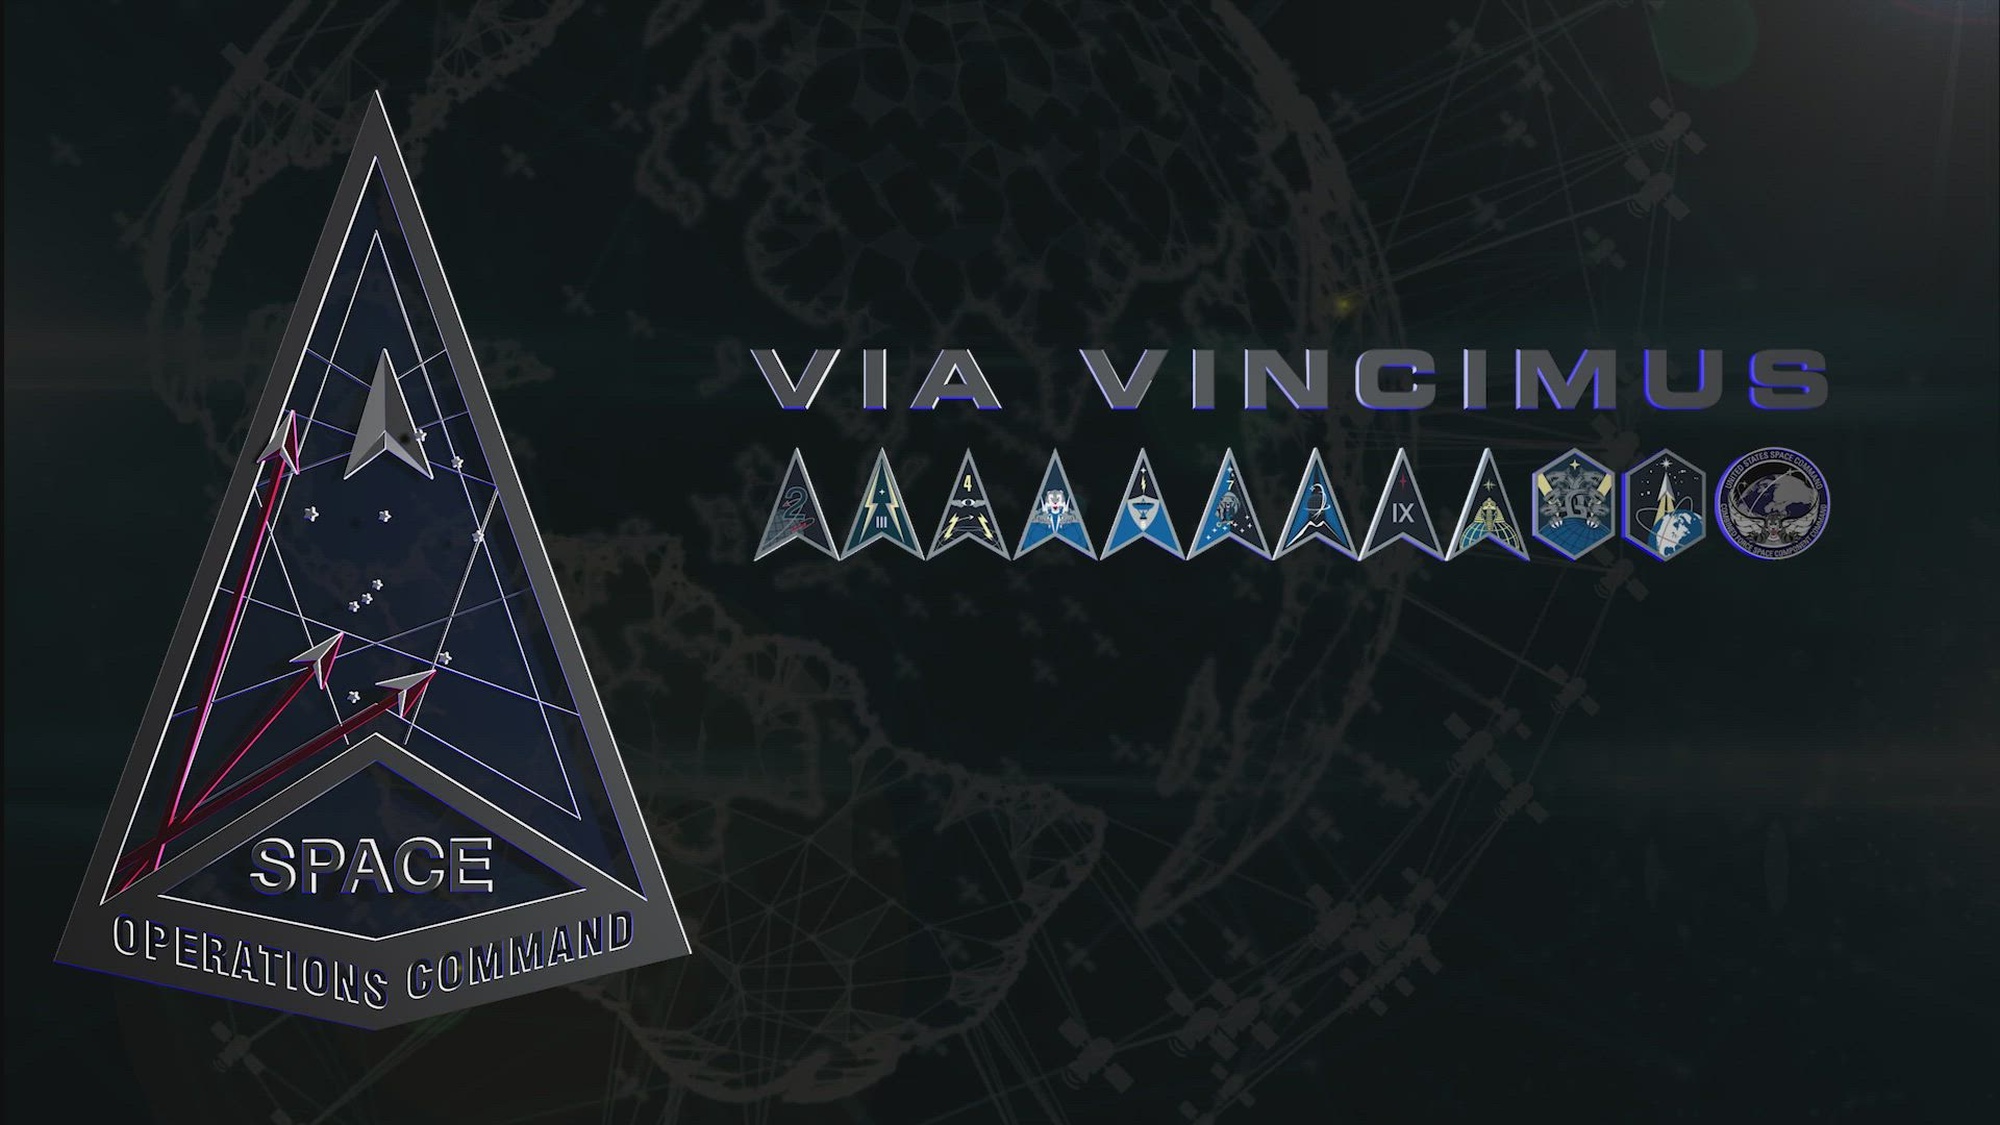 A motion graphics reveal of Space Operations Command's new motto:  "Via Vincimus."  The Latin phrase translates to "The Way We Win" in English. Space Operations Command, or SpOC, generates, presents, and sustains combat-ready intelligence, cyber, space and combat support forces and serves as the U.S. Space Force Service Component to U.S. Space Command. (U.S. Space Force video by Dave Grim)